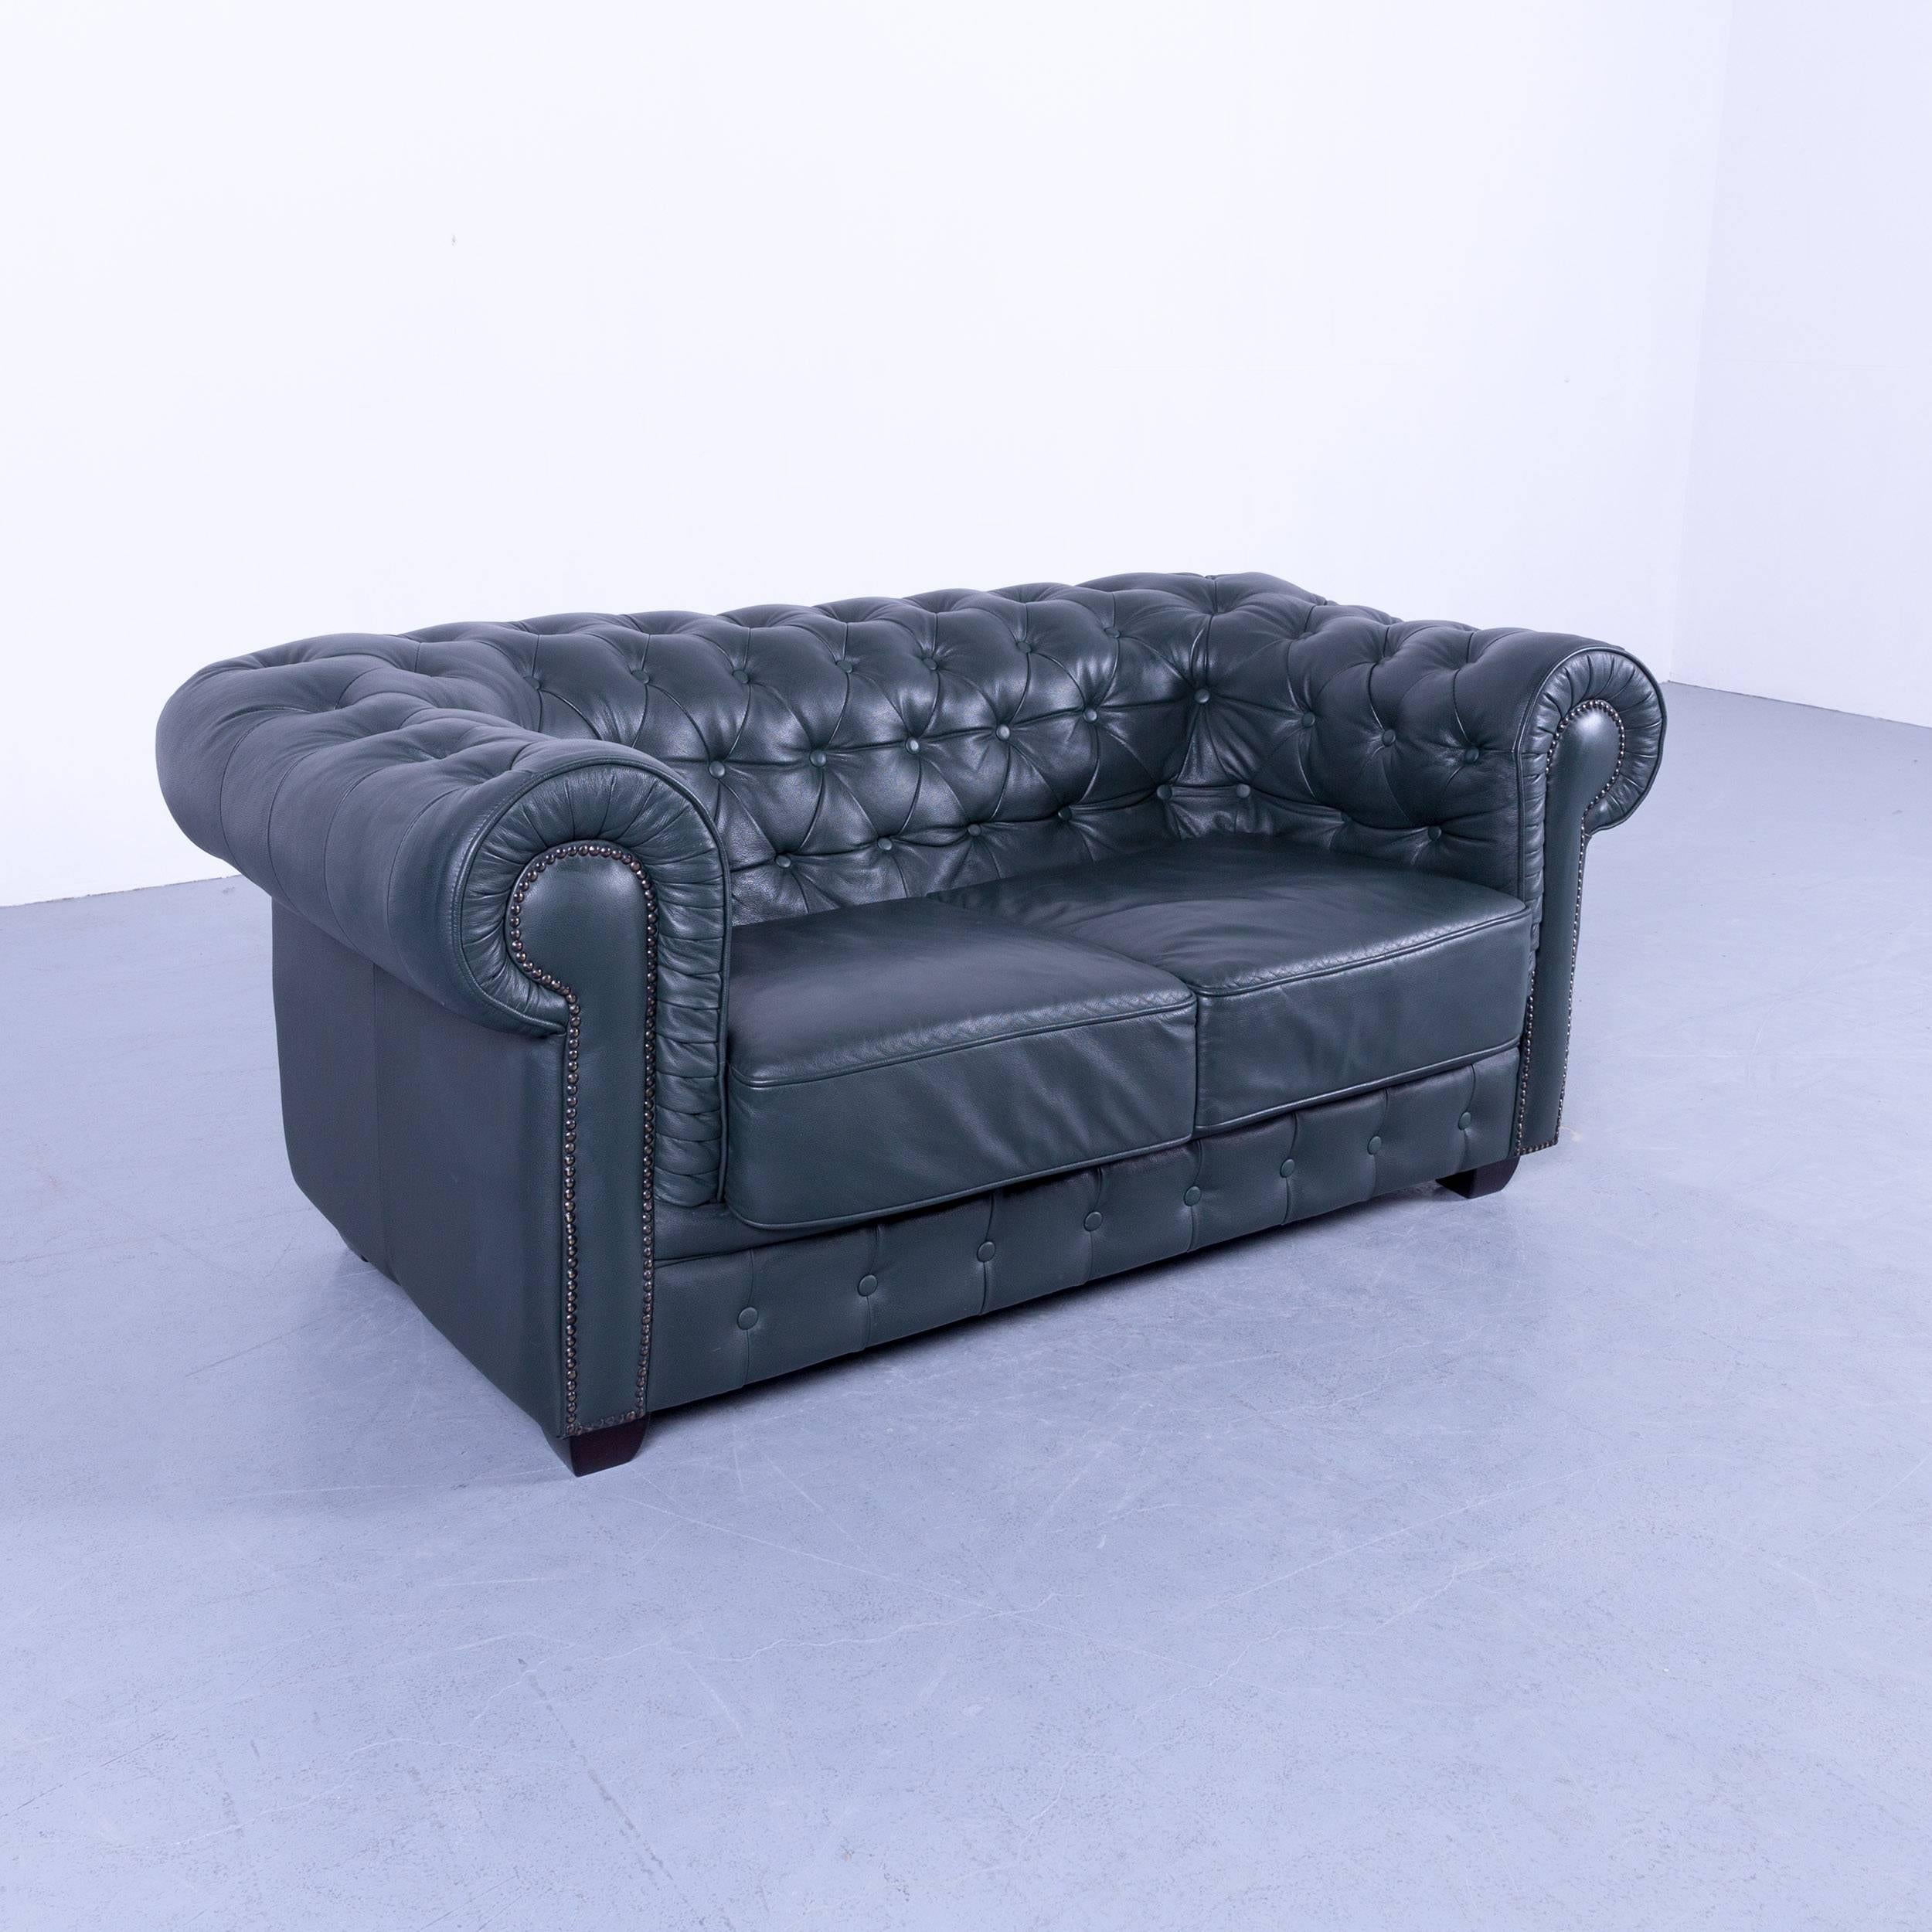 British Chesterfield Sofa Dark Green Two-Seat Vintage Retro Couch Rivets UK